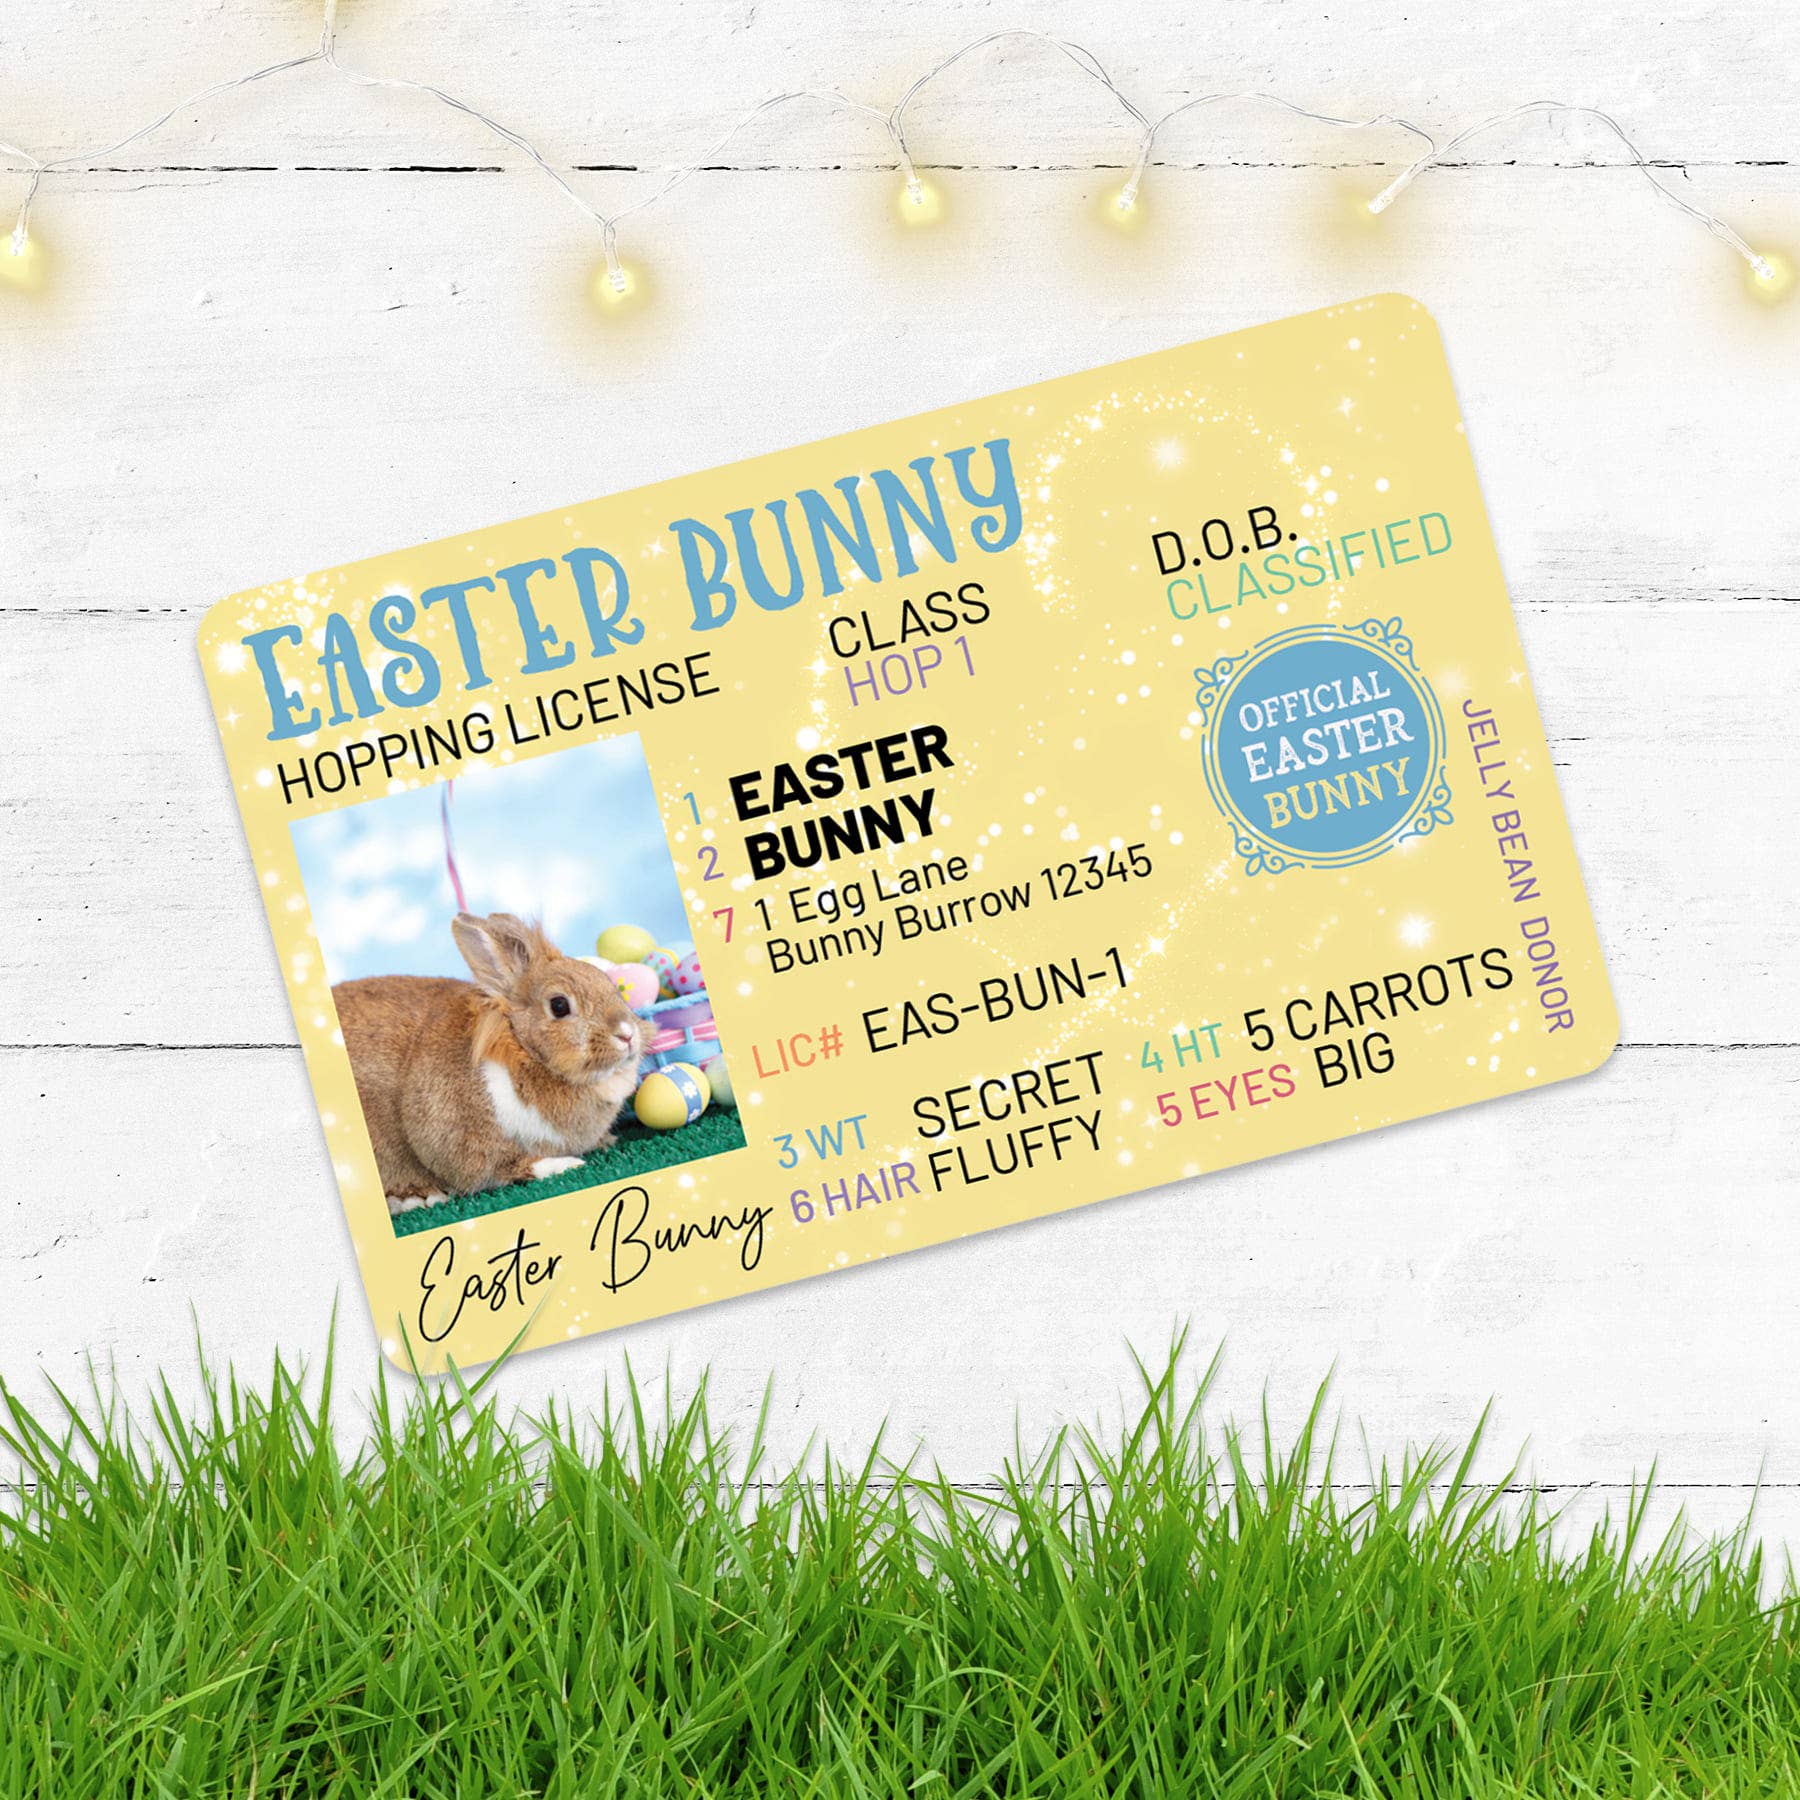 Easter Bunny Lost Hopping License/Unpackaged